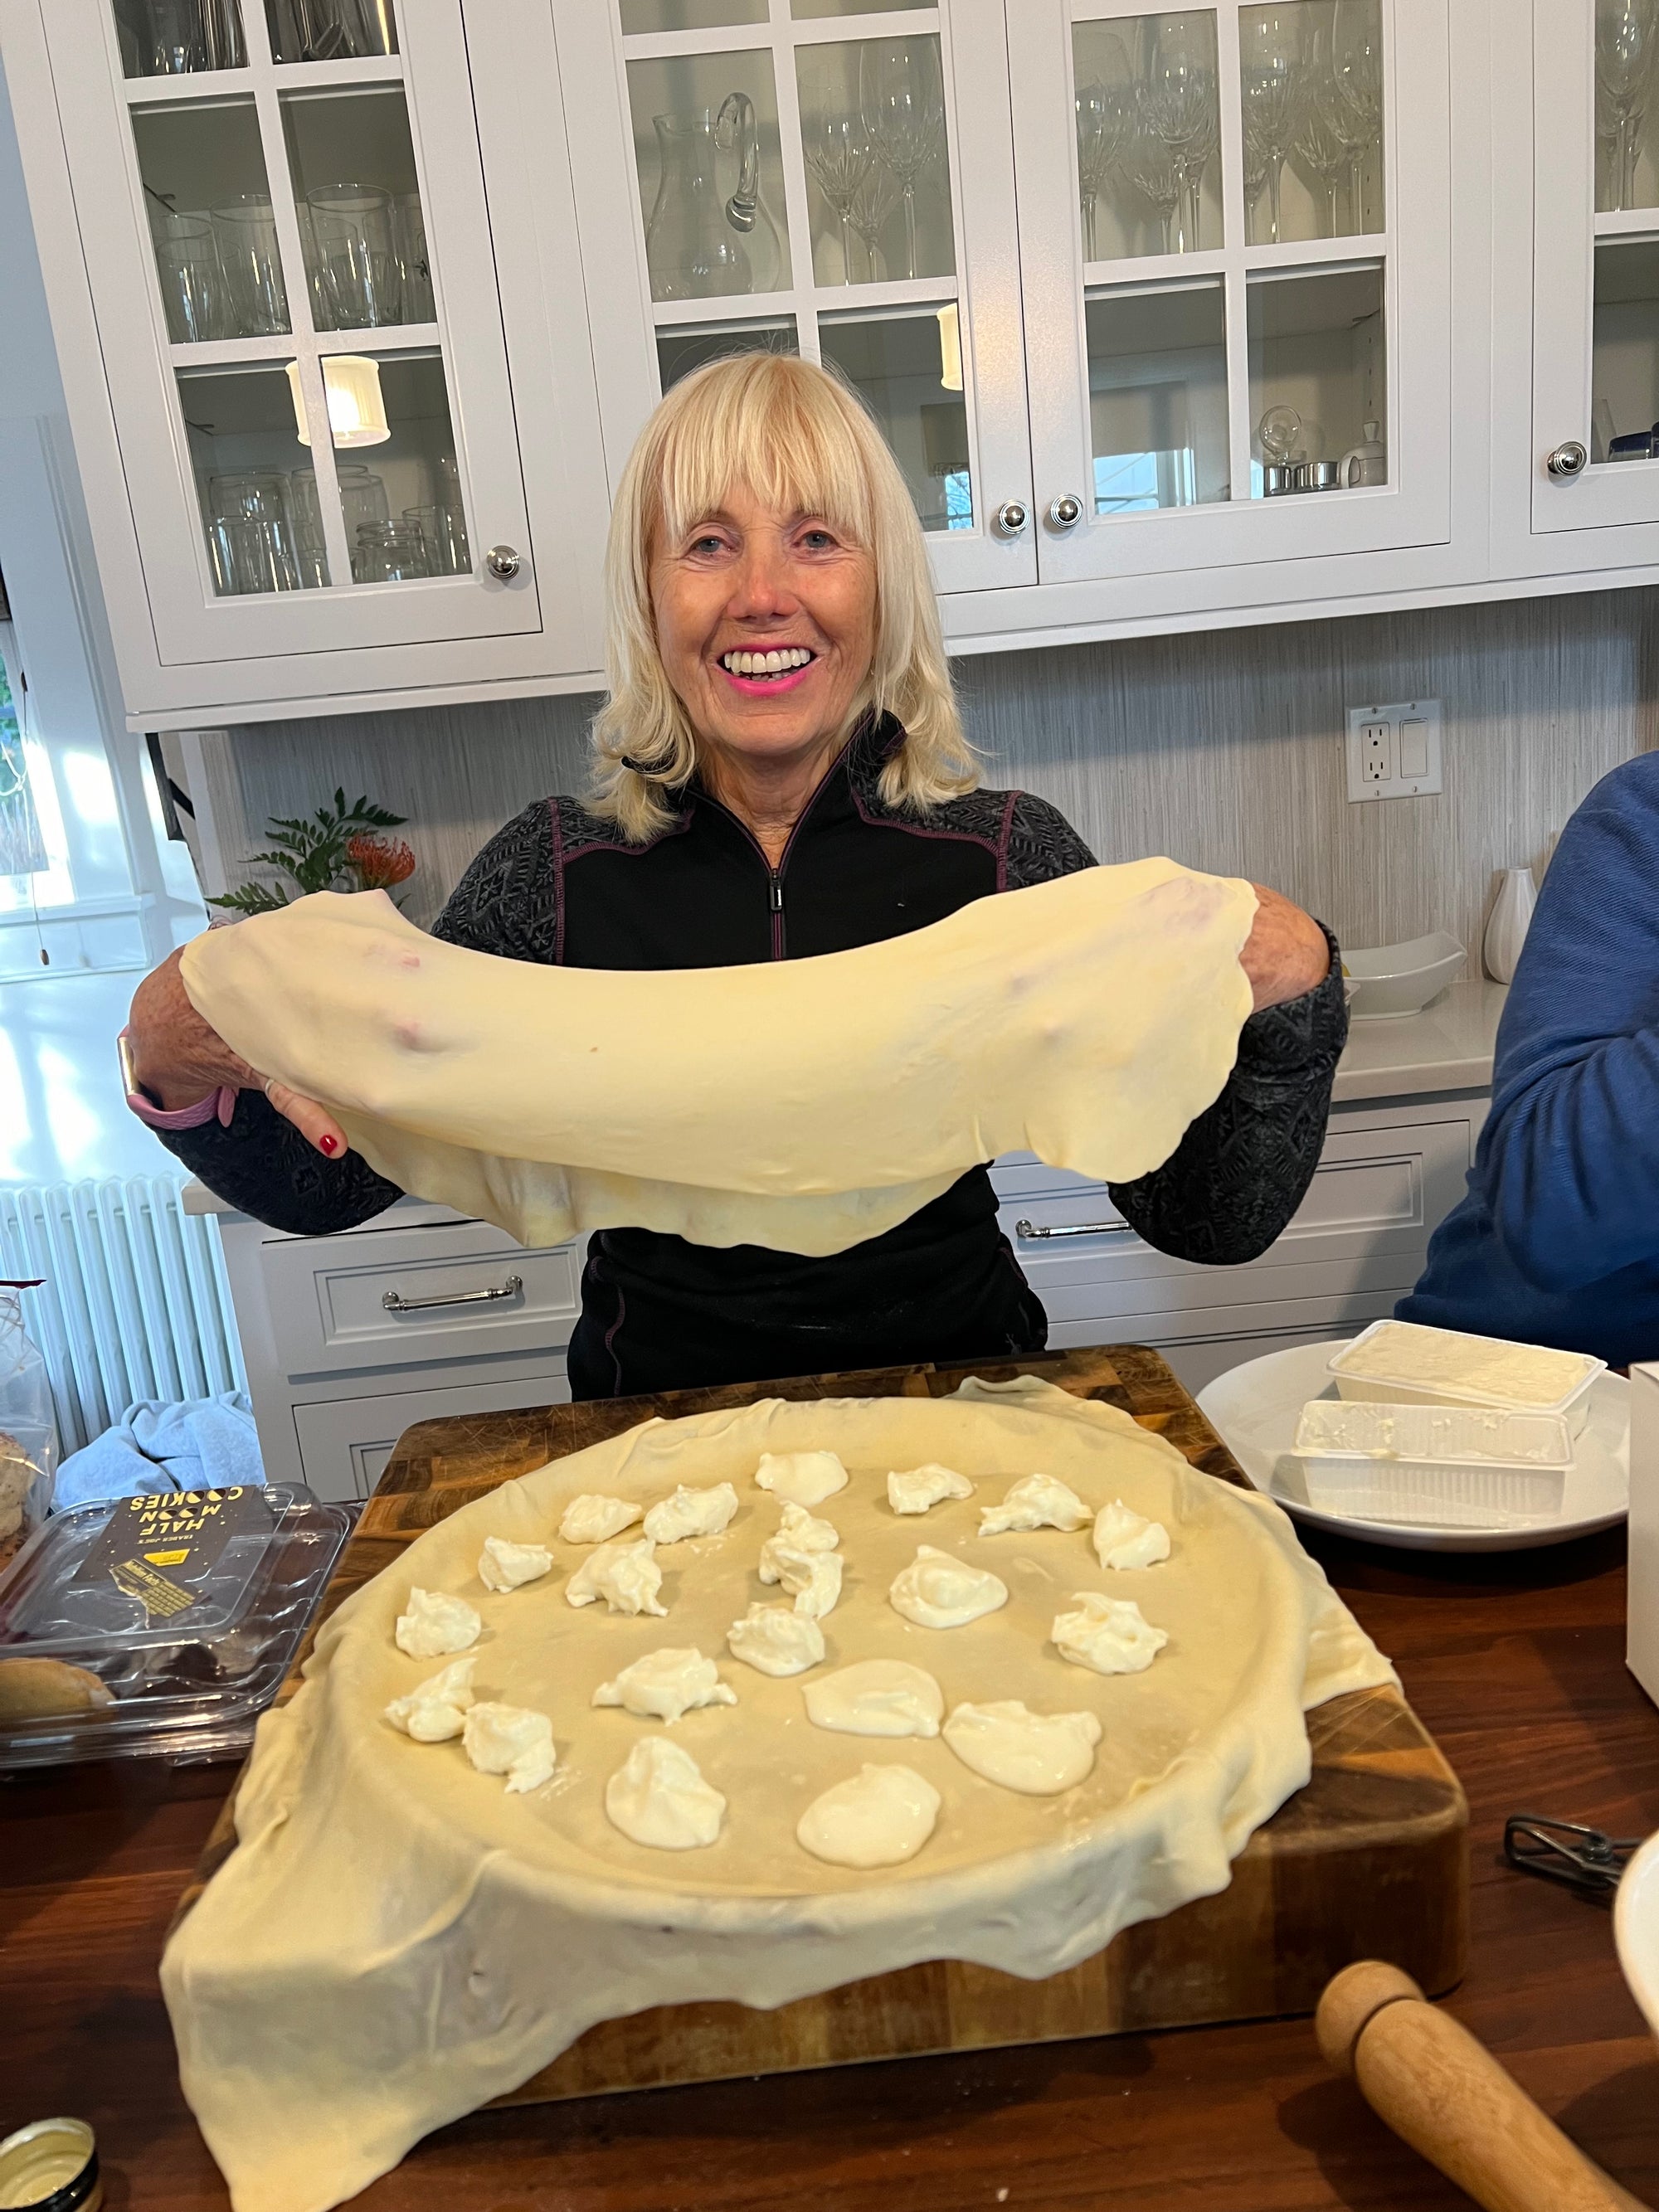 A woman is holding up a thin piece of dough, stretched out between her hands. Below it is a pan covered in another thin sheet of pastry, and dotted with a white soft cheese. The woman is smiling.